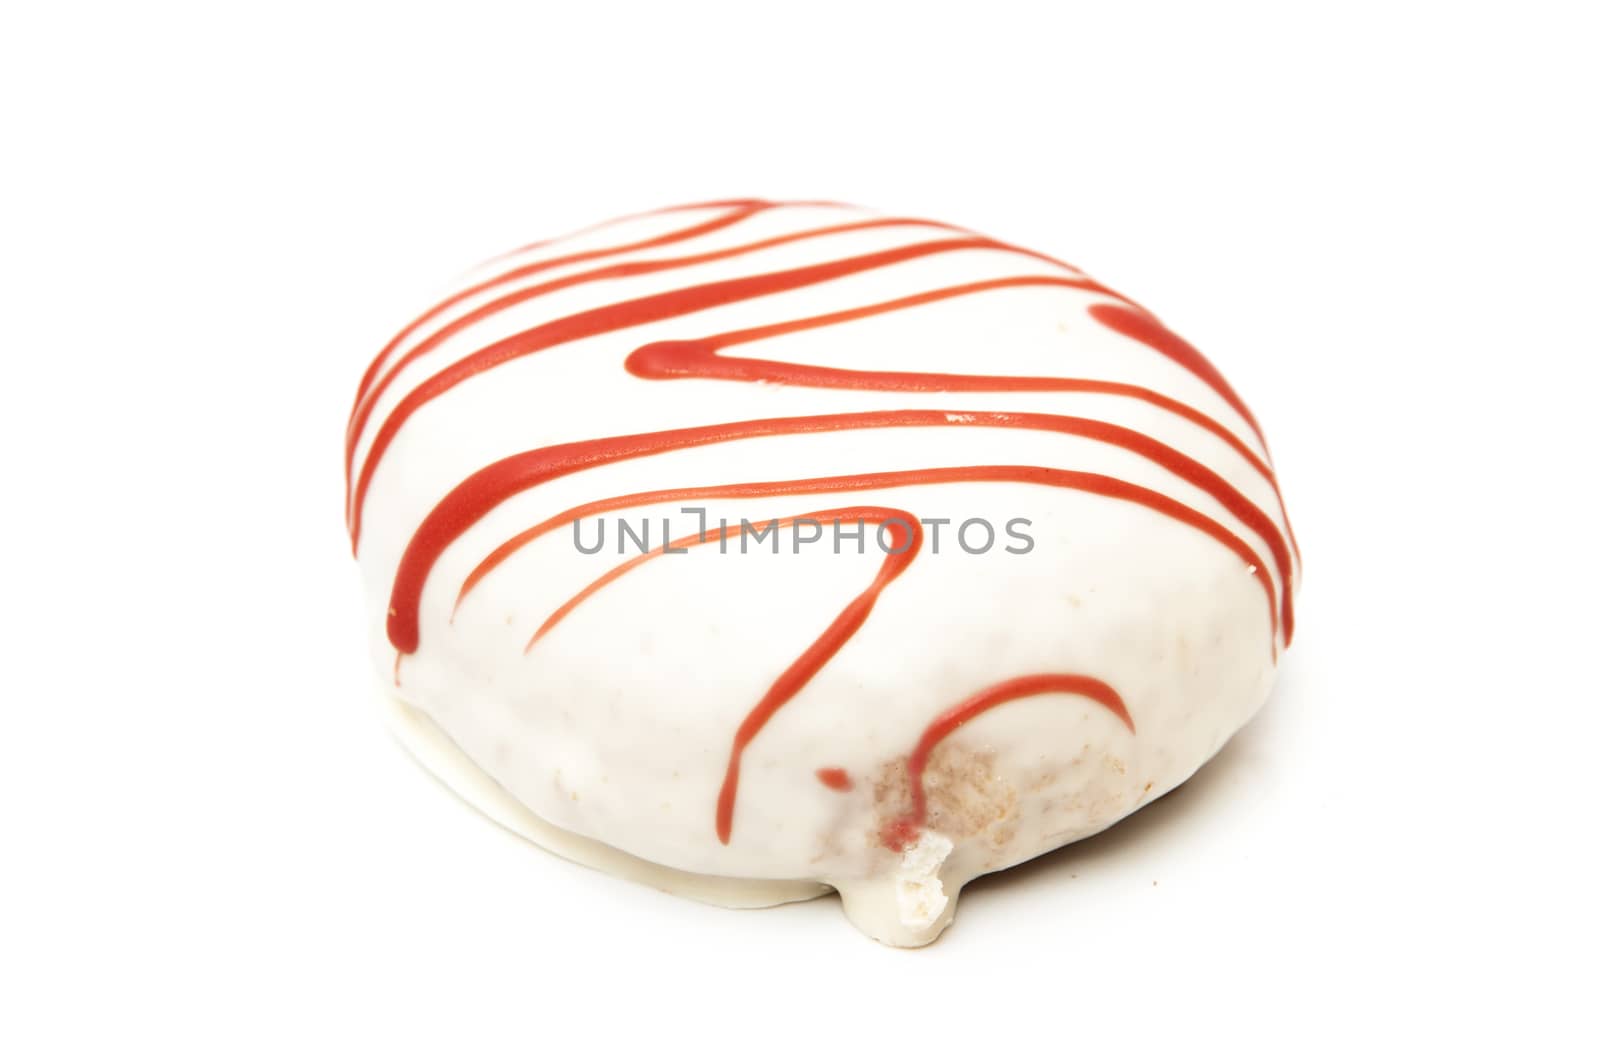 strawberry donuts on a white background